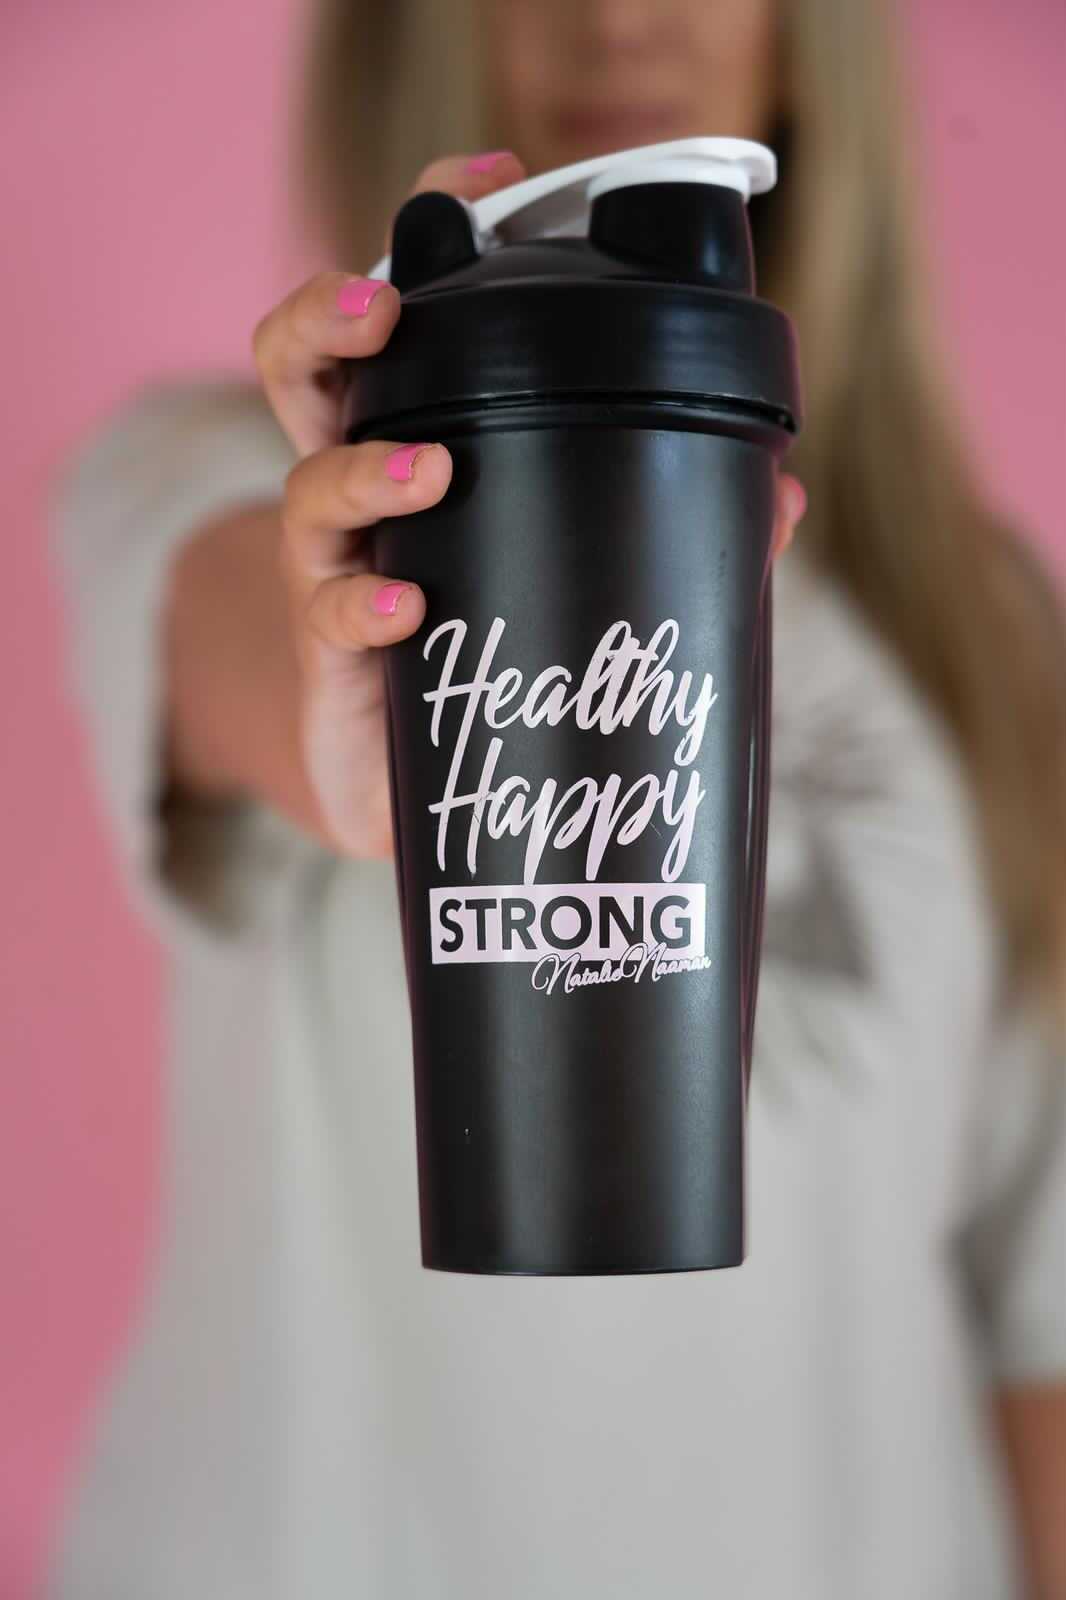 Healthy Happy Strong Protein Shaker!